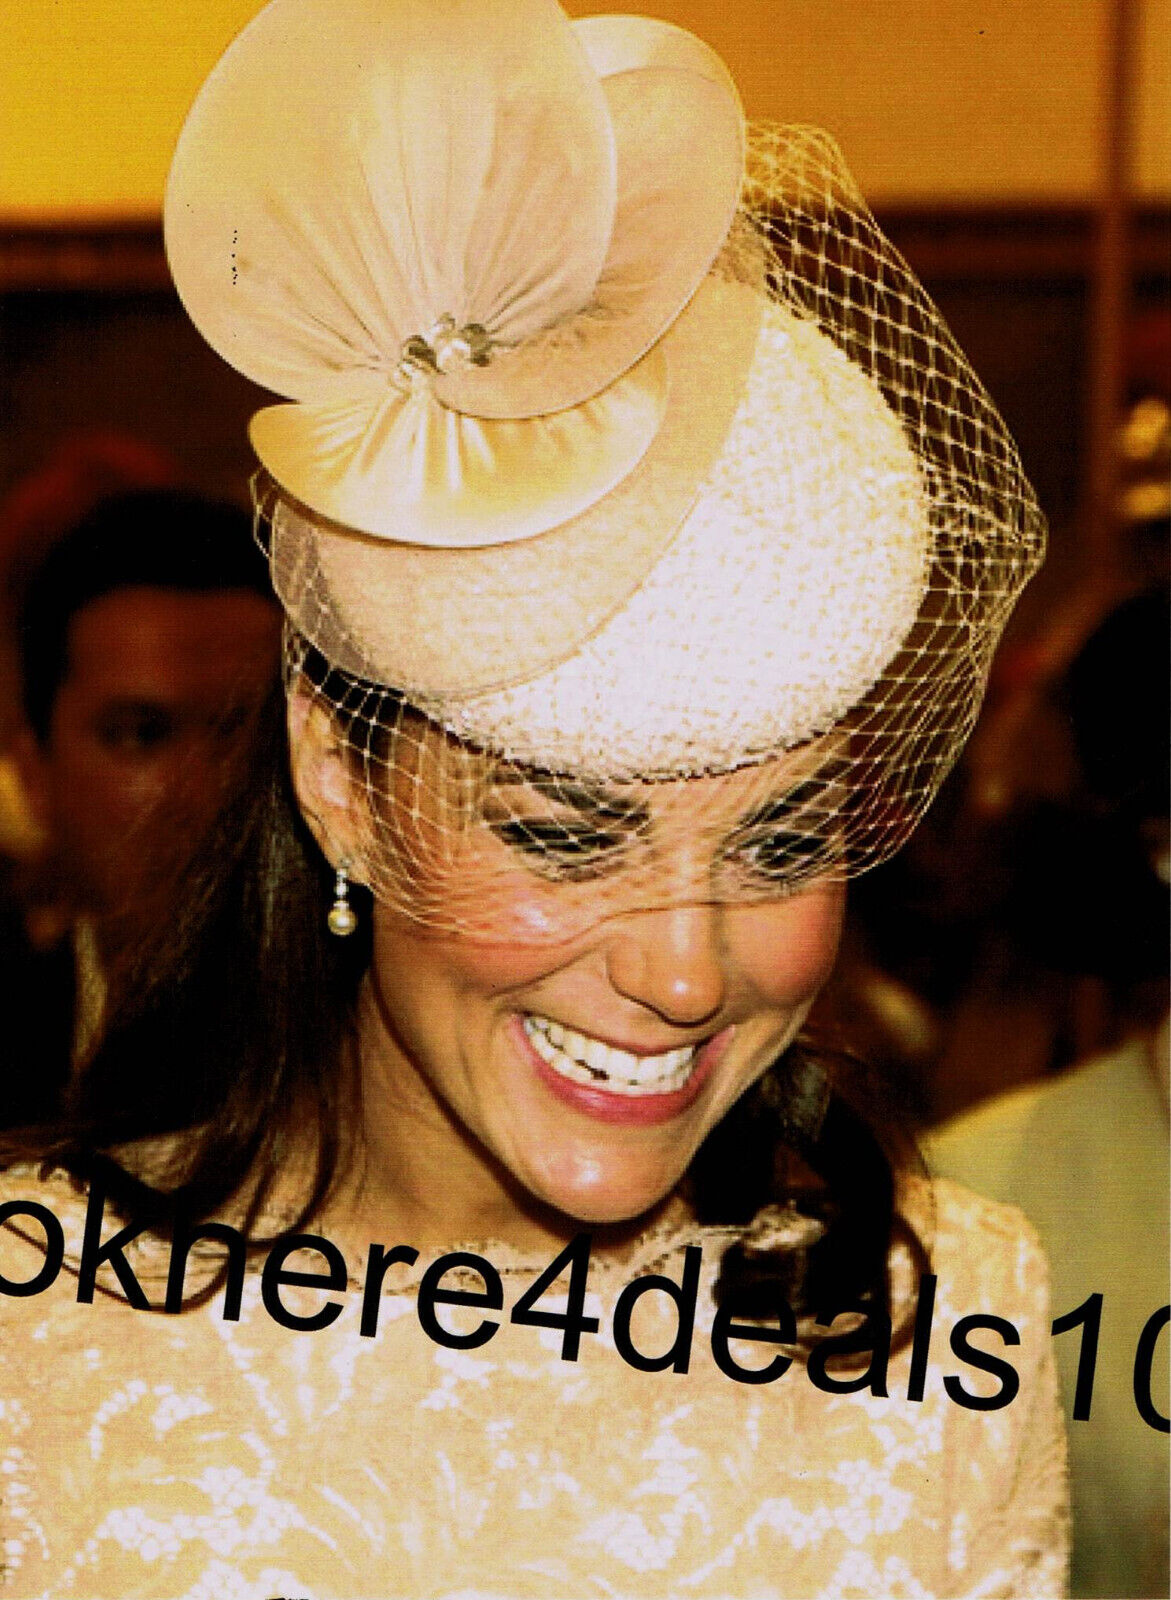 Kate Middleton Photo 4x6 Royal Collectibles Great Britain London England Без бренда